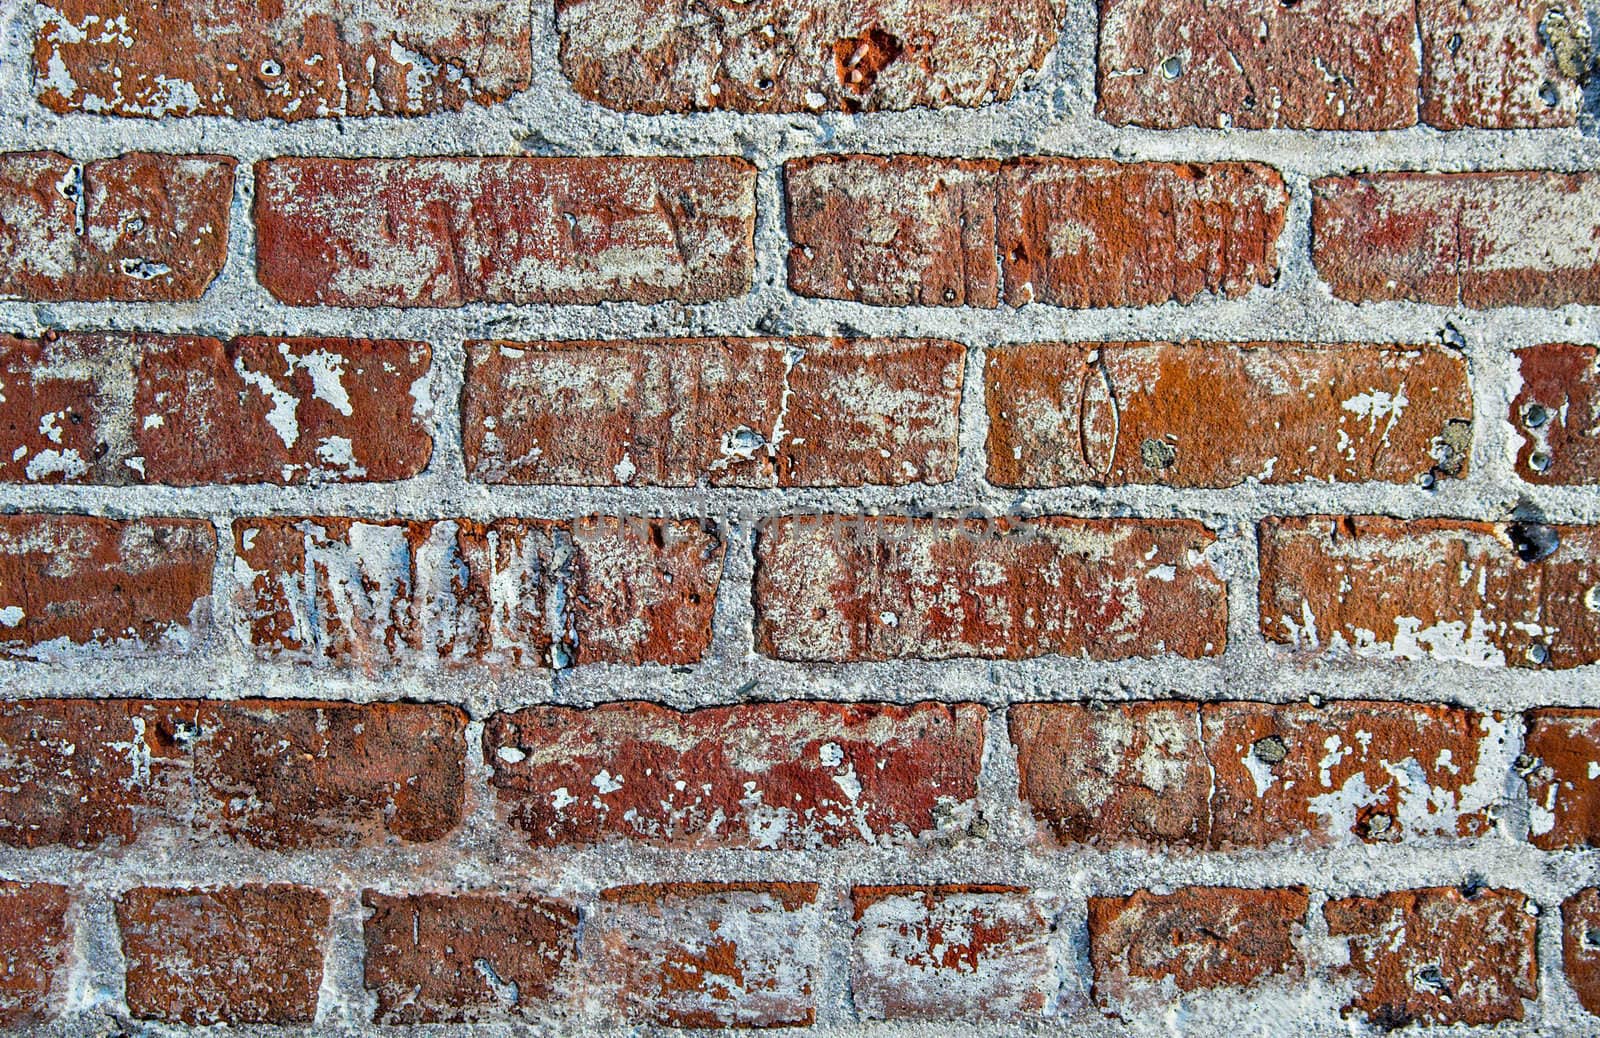 Red brick wall showing detail, patterns, and texture